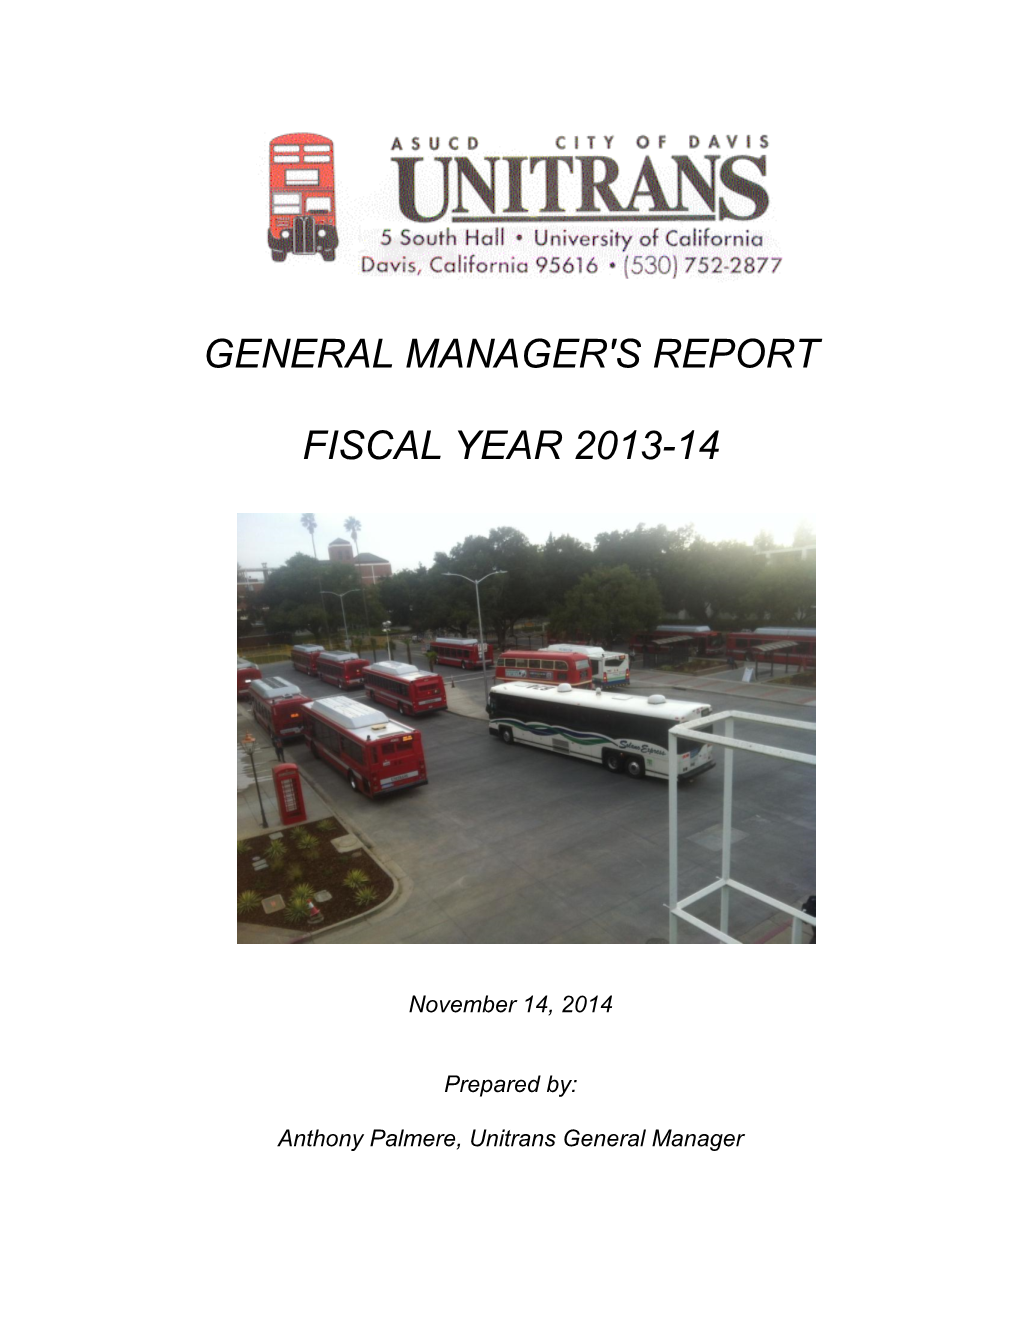 General Manager's Report Fiscal Year 2013-14